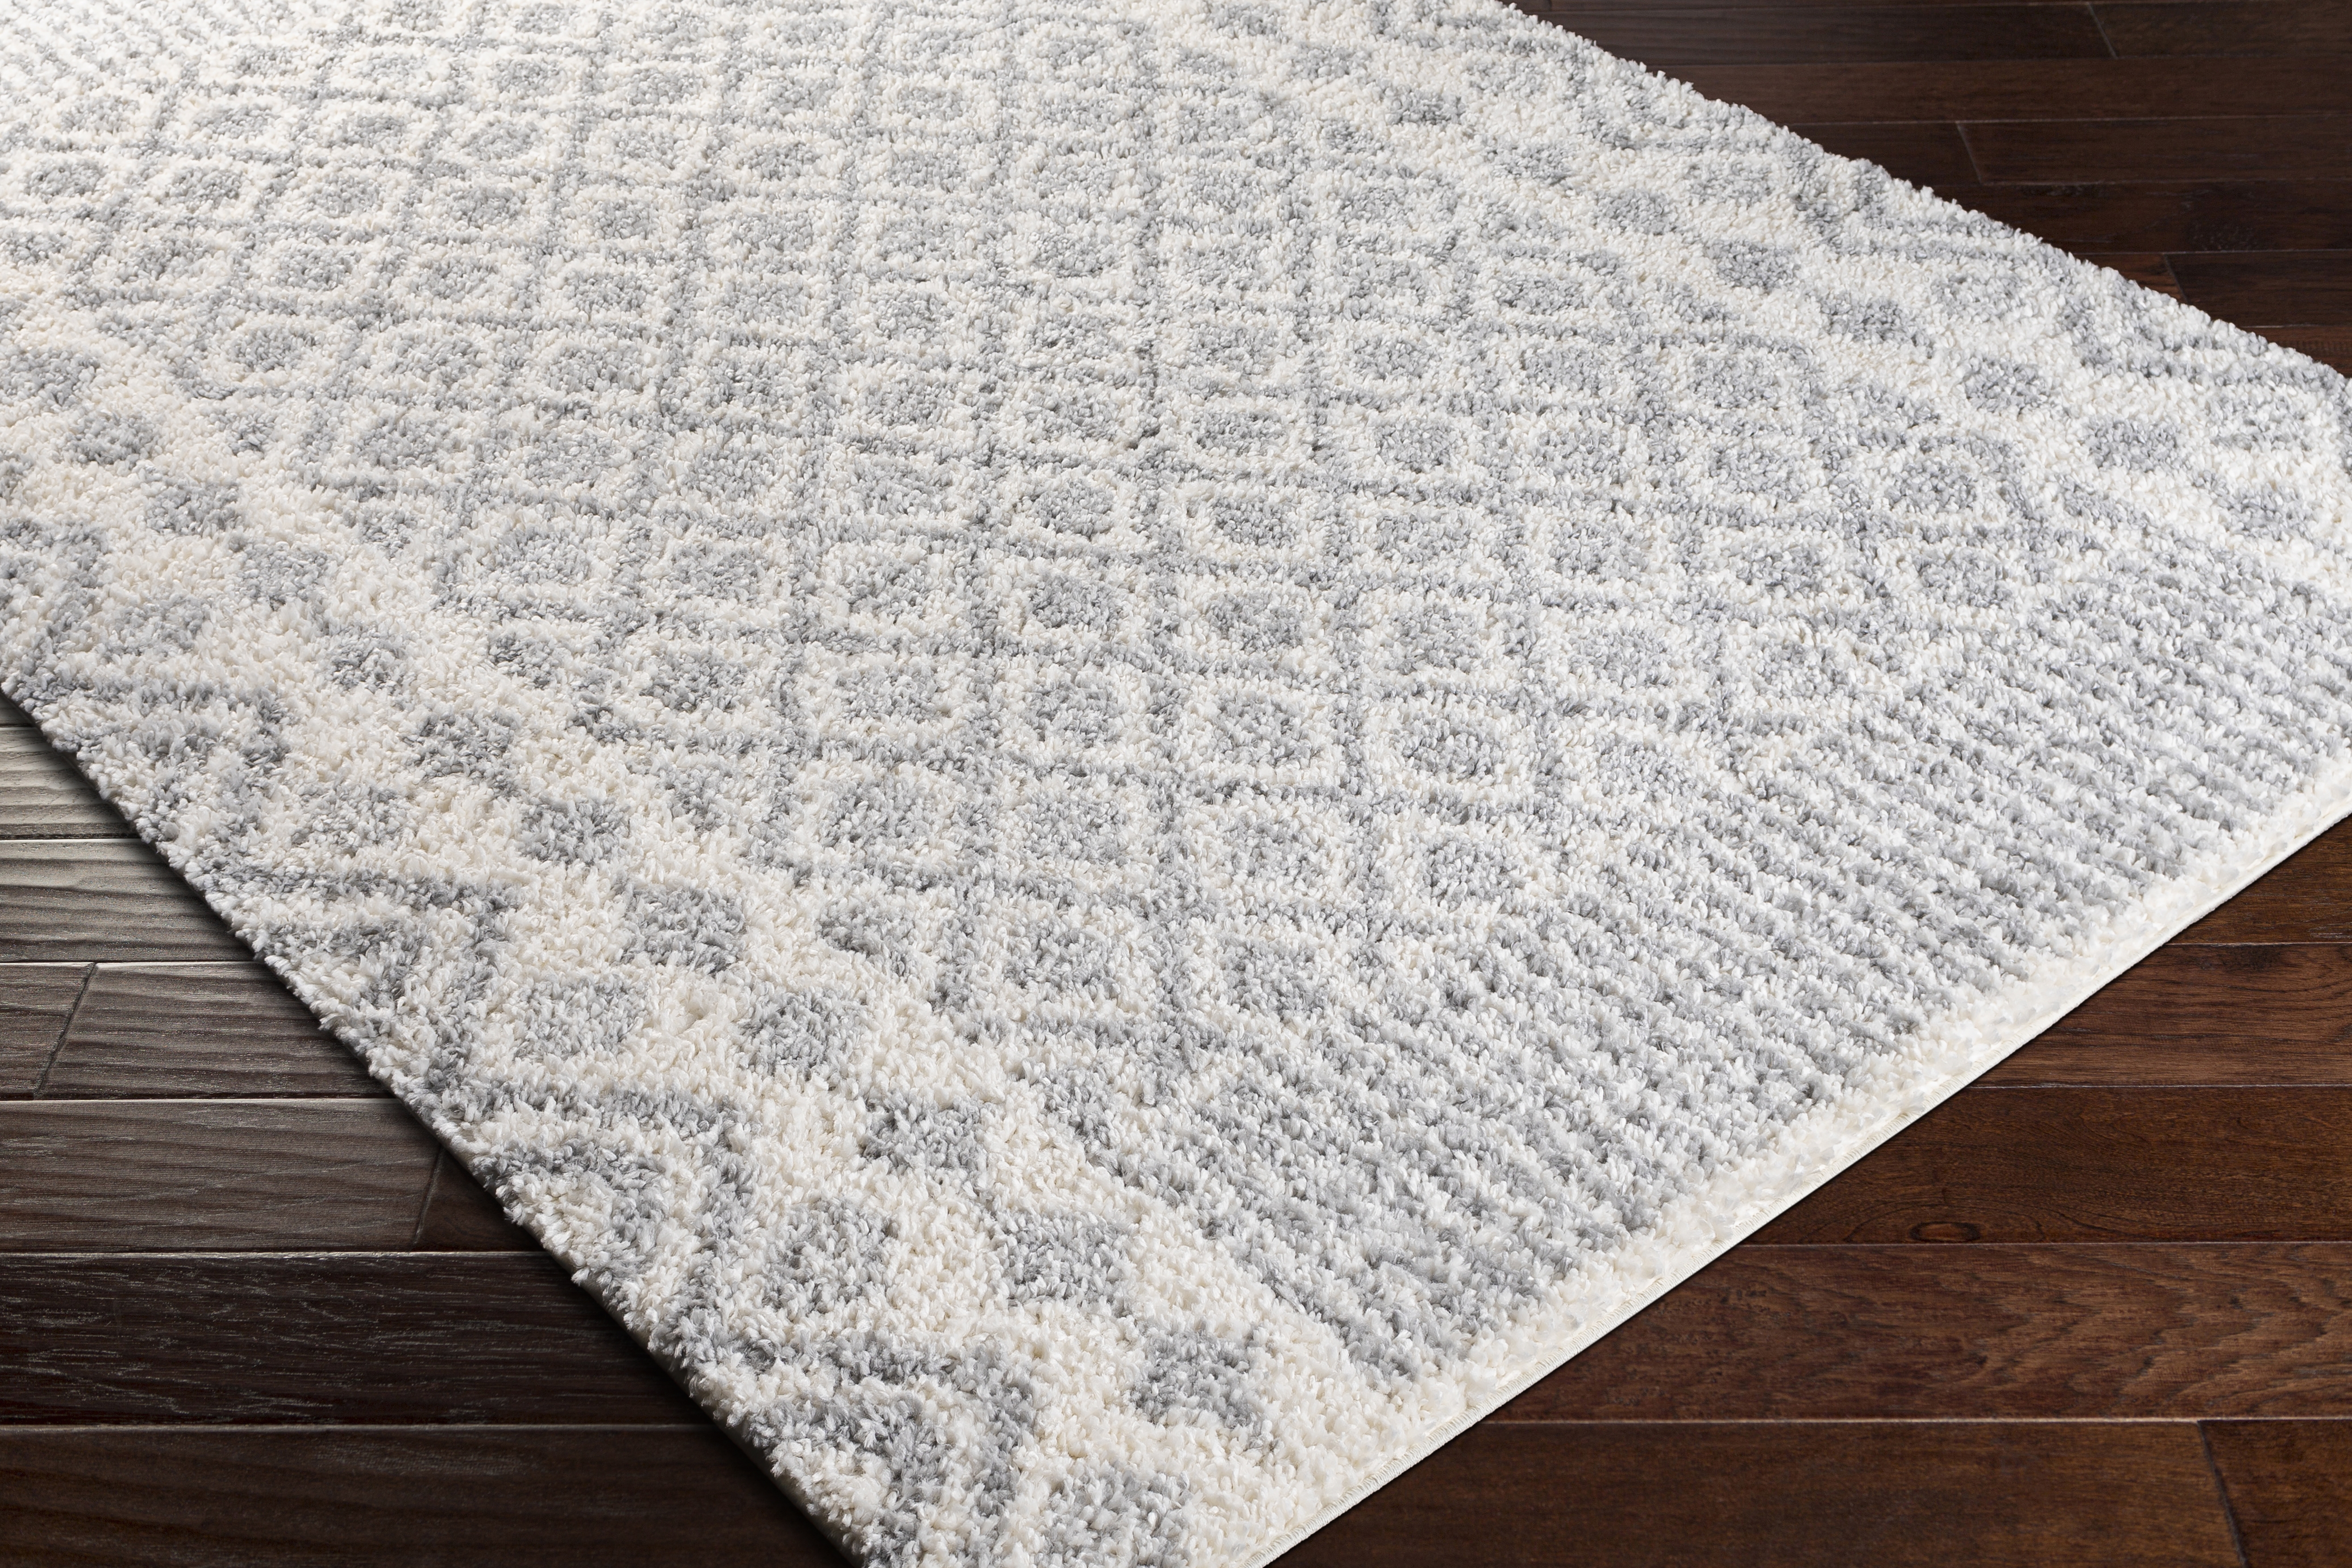 Deluxe Shag Rug, 7'10" x 10'3" - Image 6